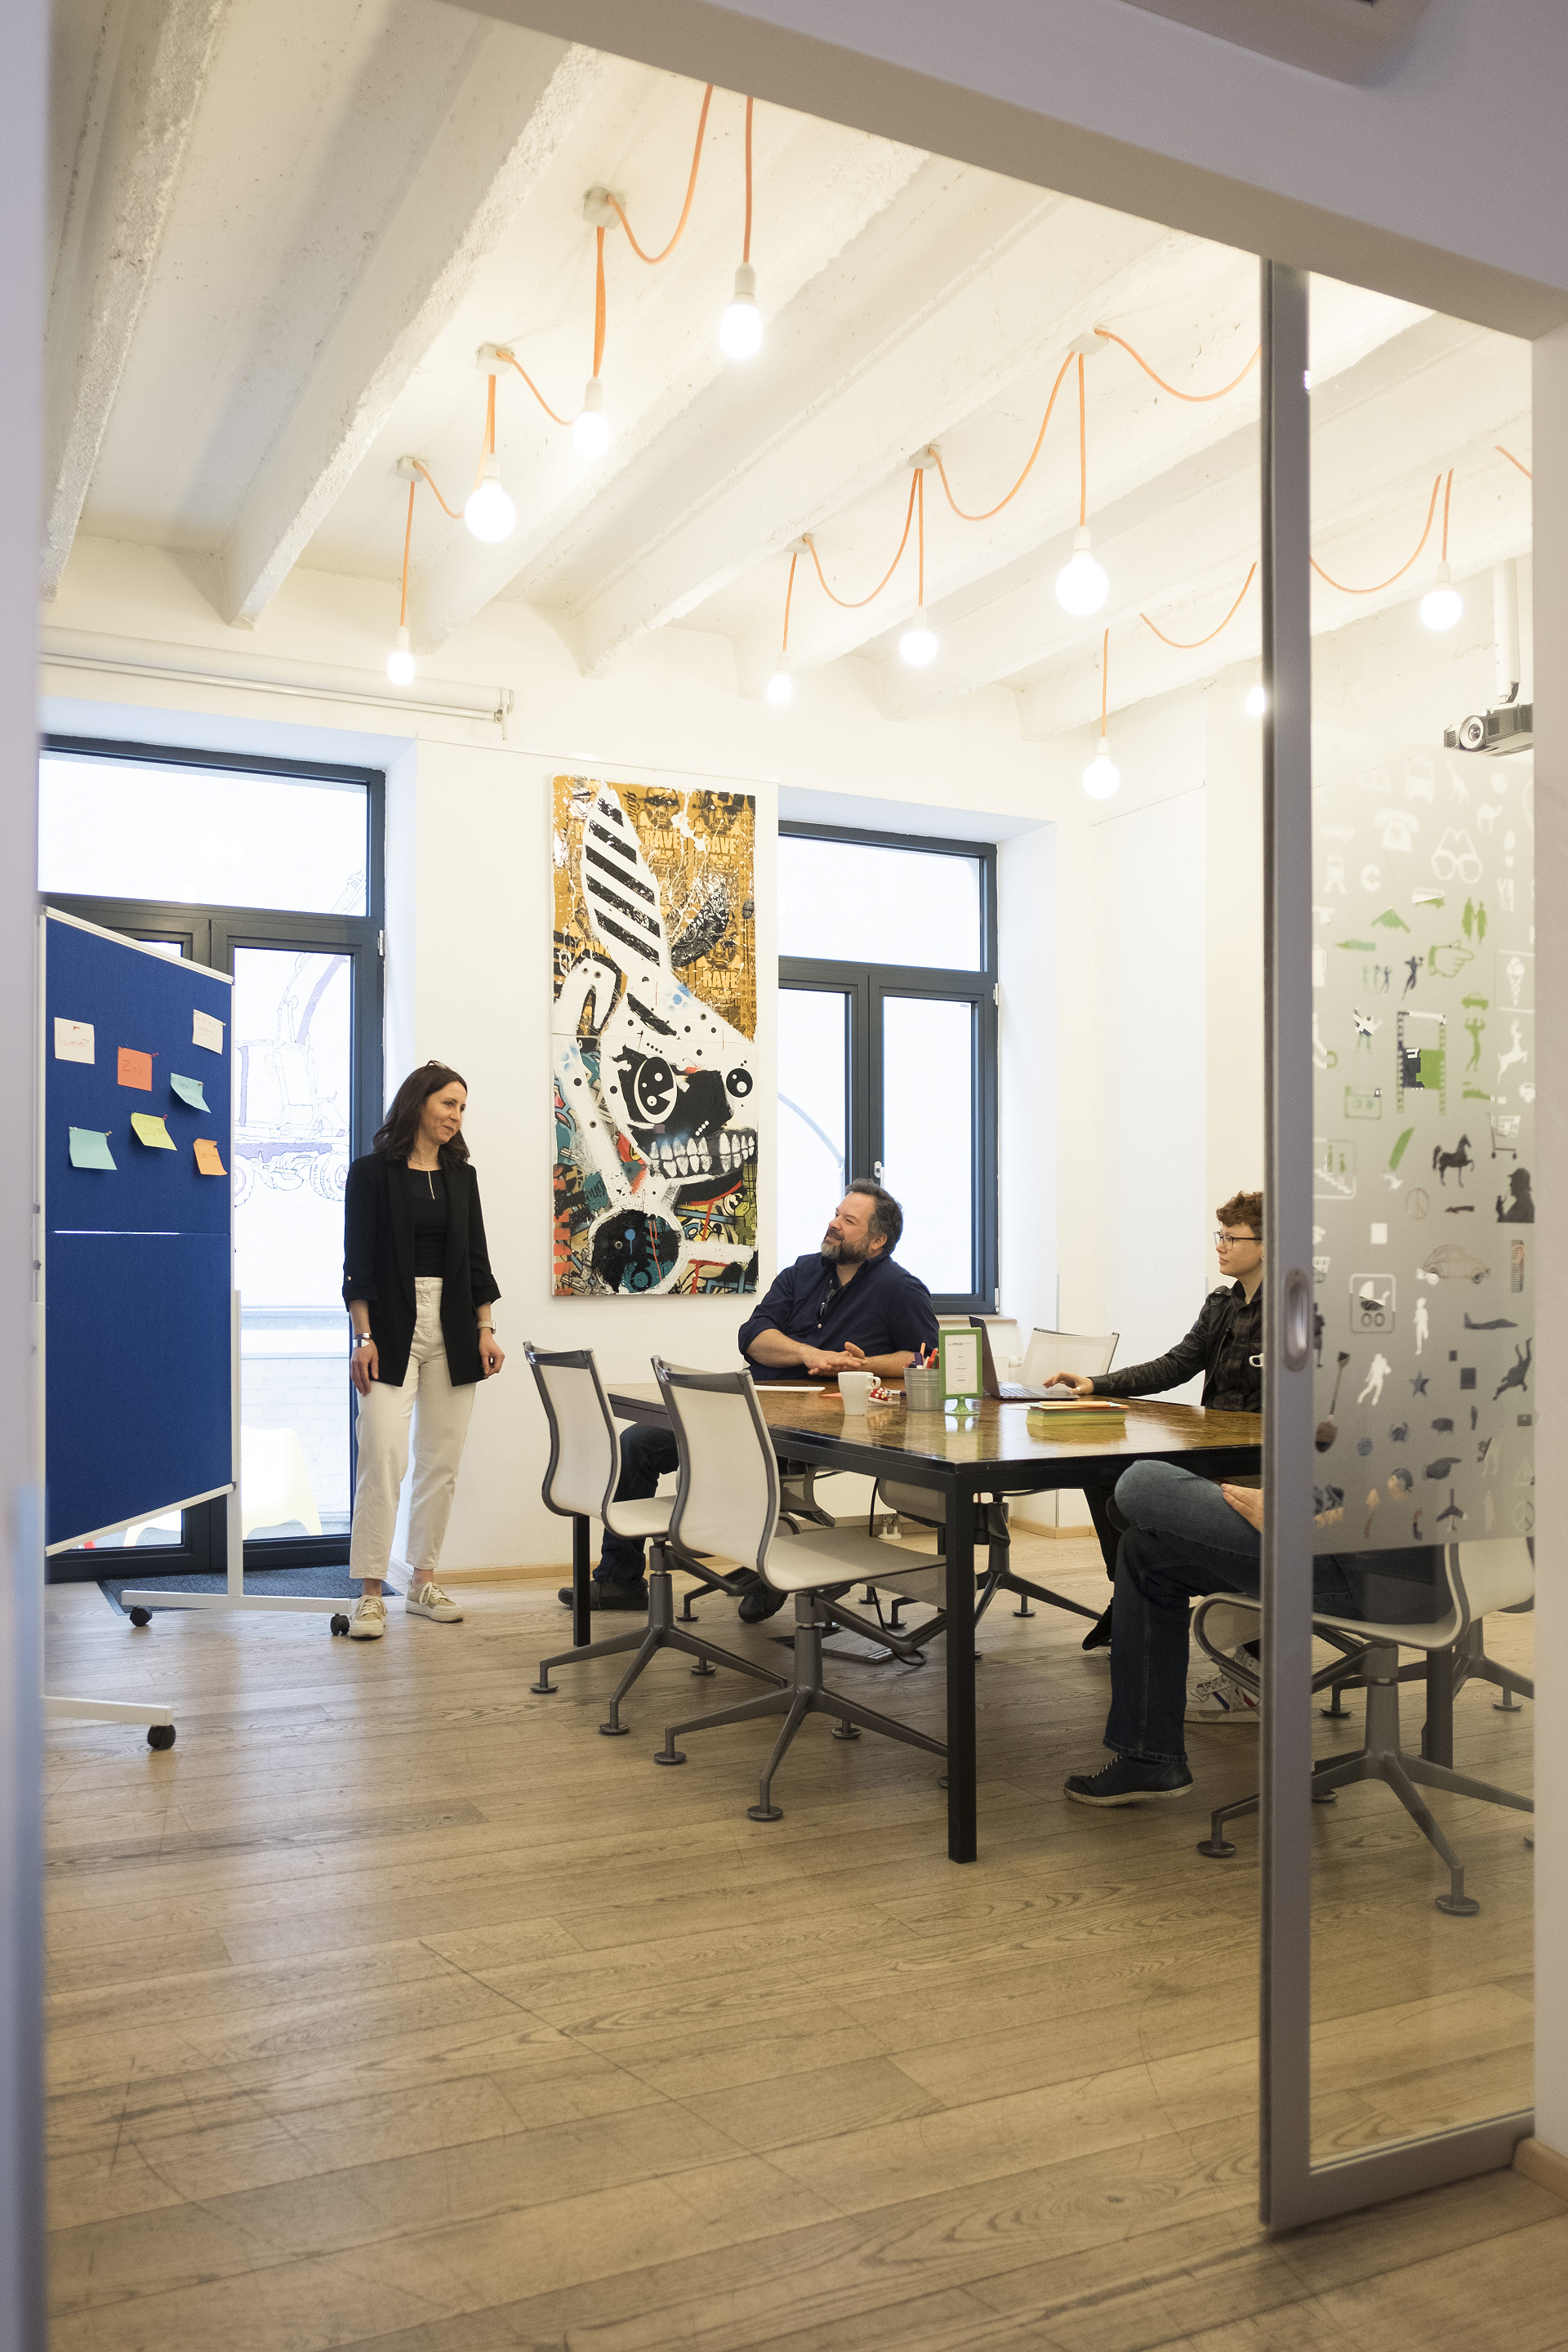 Find your coworking & shared office space in Vienna! We offer flexible office solutions with individual packages. LOFFICE - your cool shared office in Vienna.